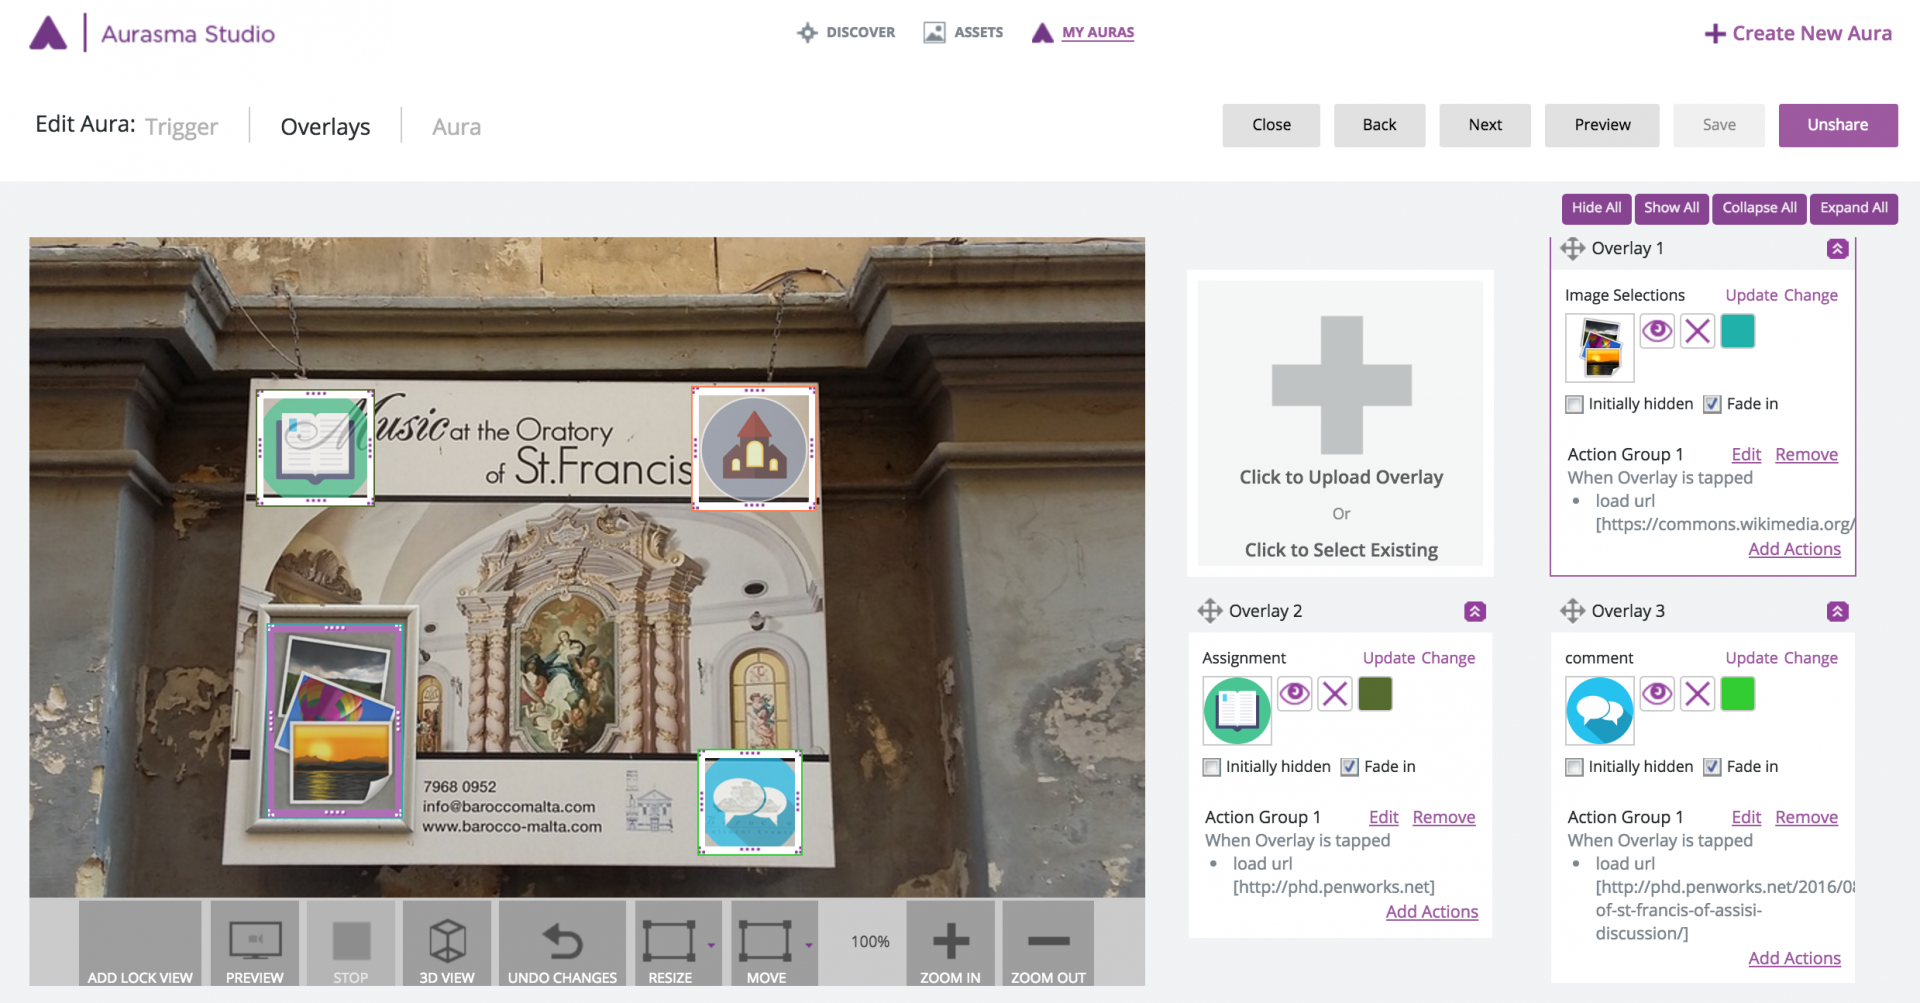 Augmenting the noticeboard with trigger icons at St Francis of Assisi church using the Aurasma Studio